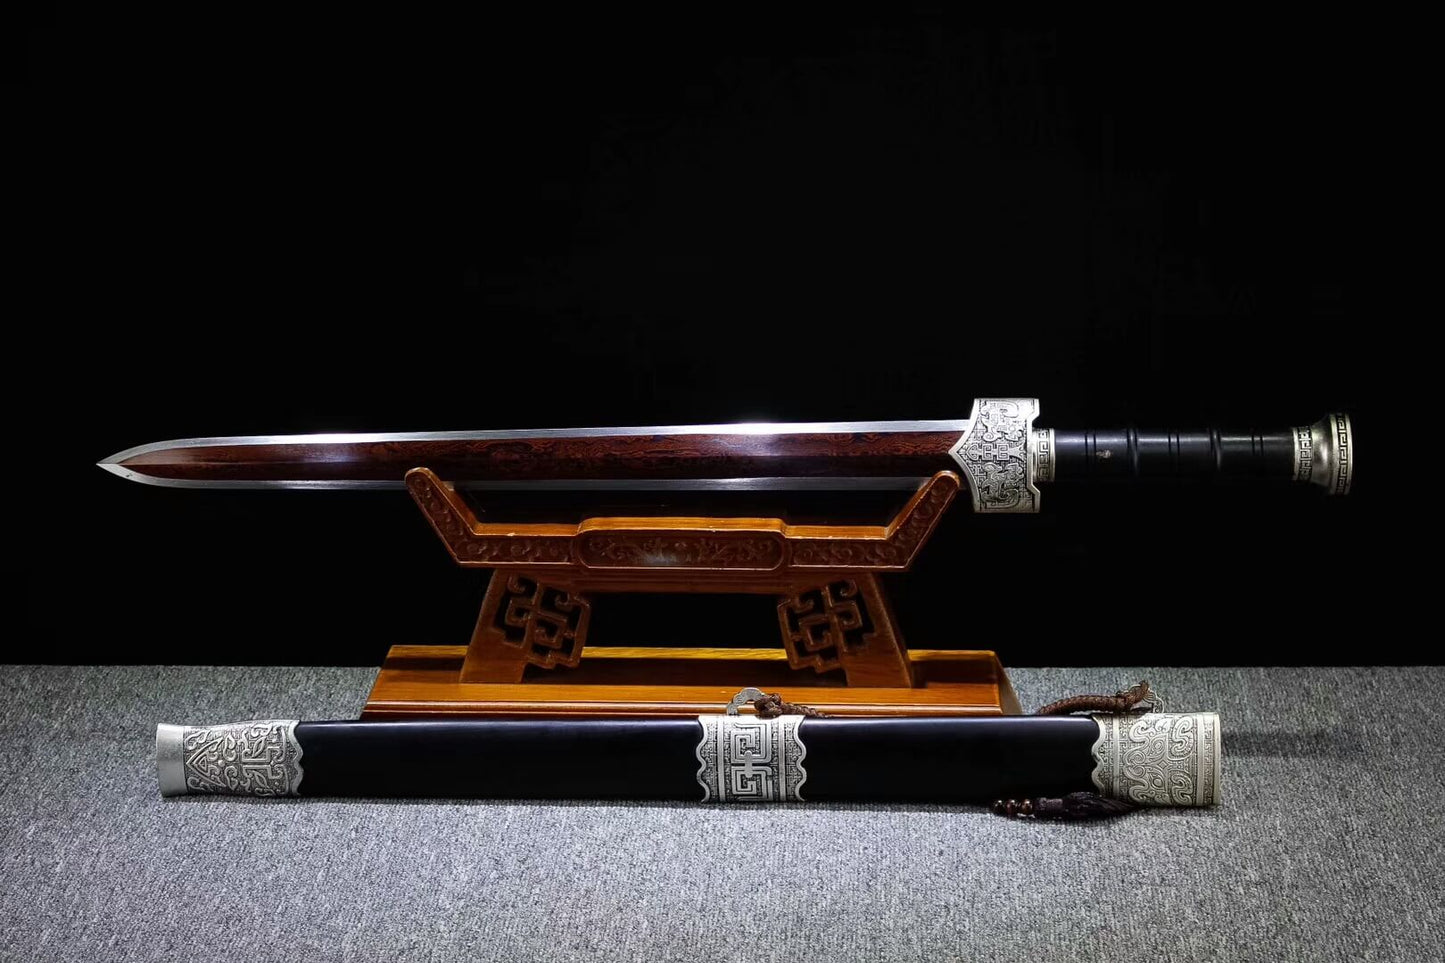 Zhaoyun sword,Folded steel octahedral blade,Black scabbard,Alloy fittings - Chinese sword shop